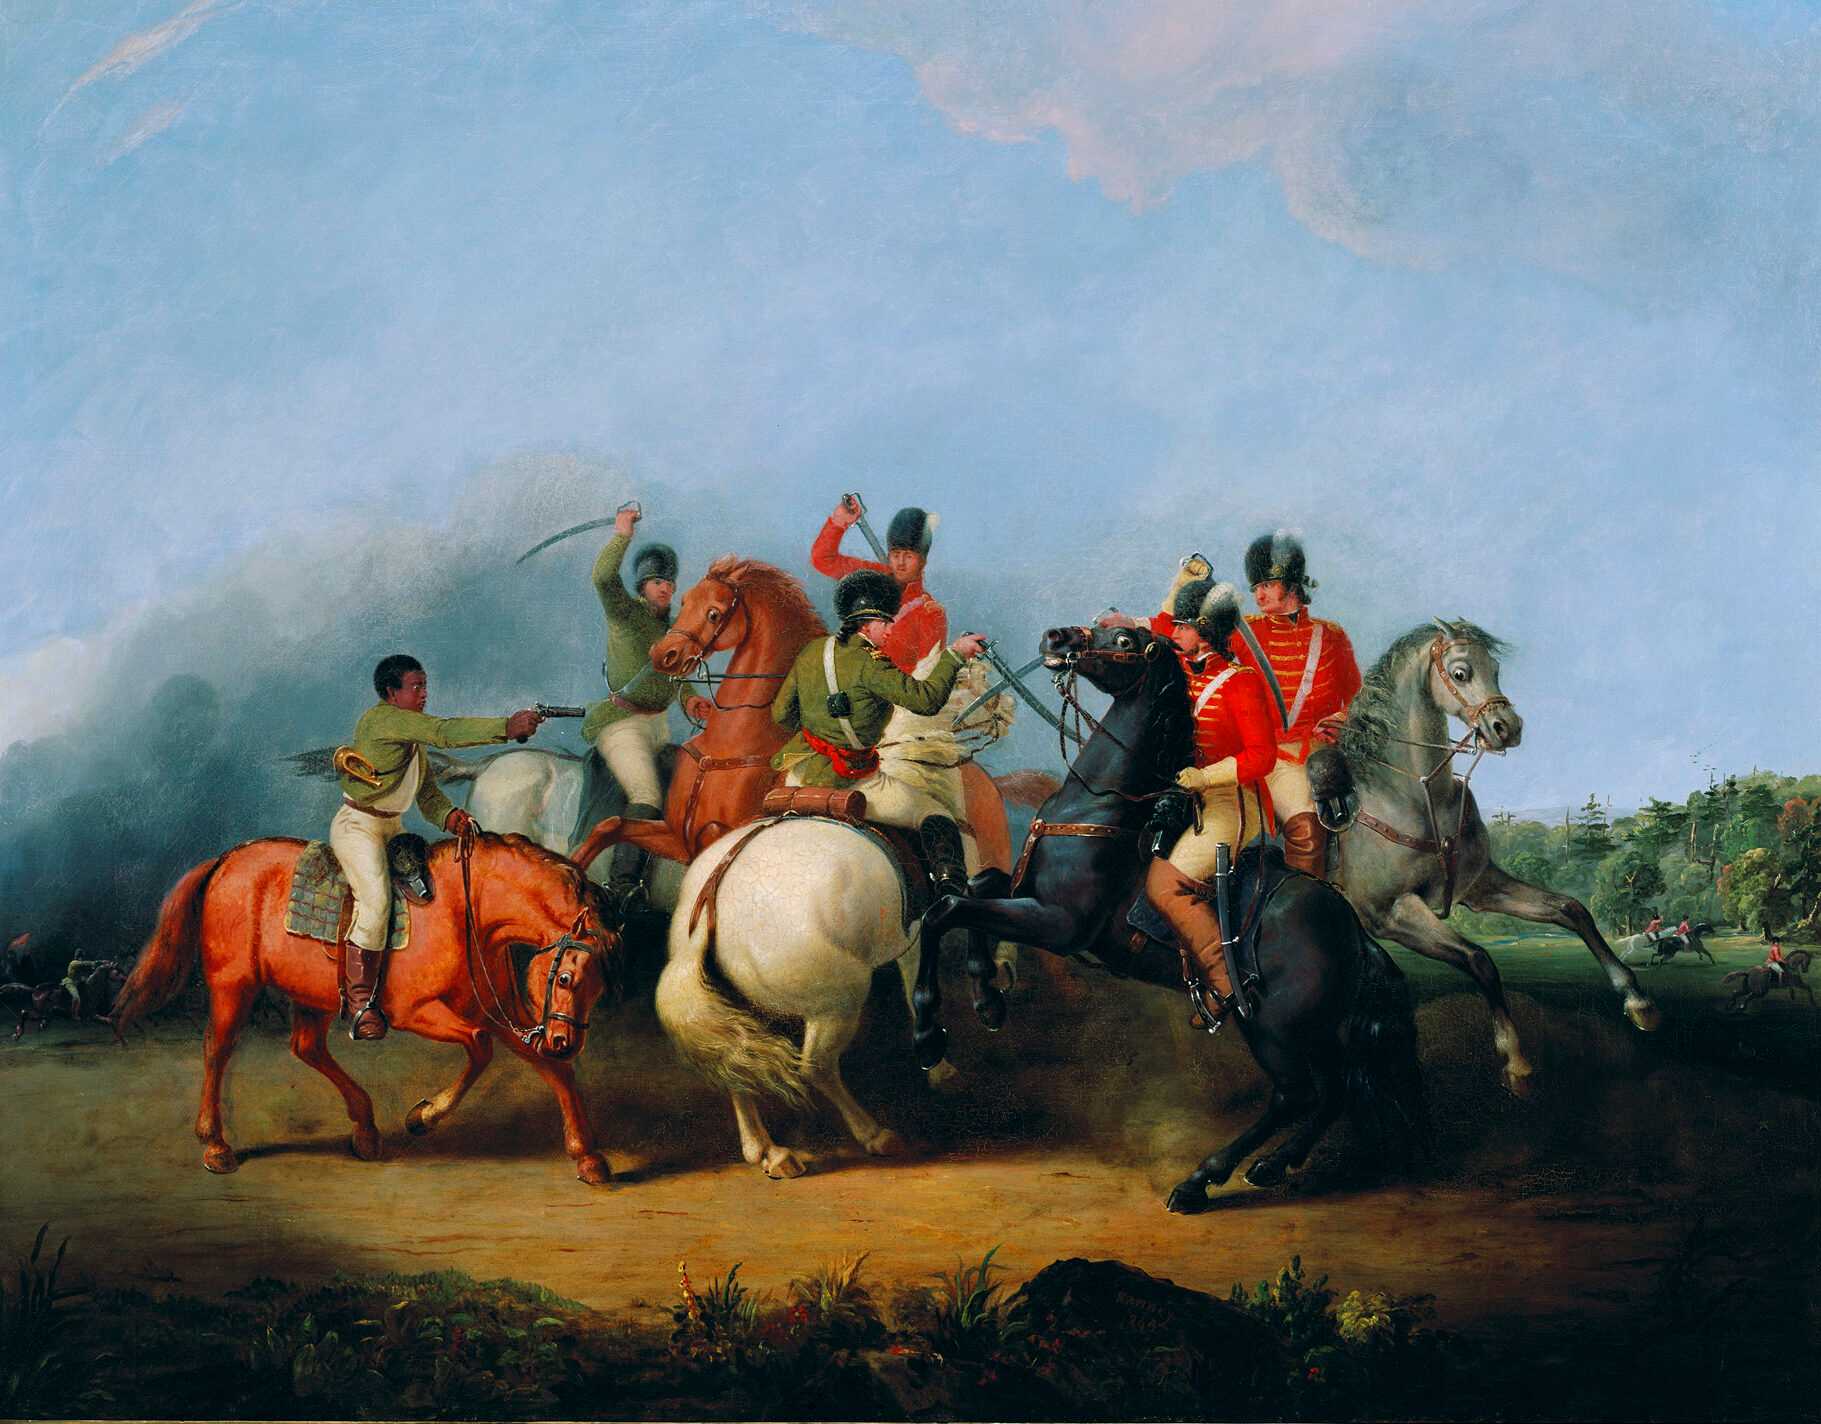 The Battle of Cowpens, painted by William Ranney in 1845